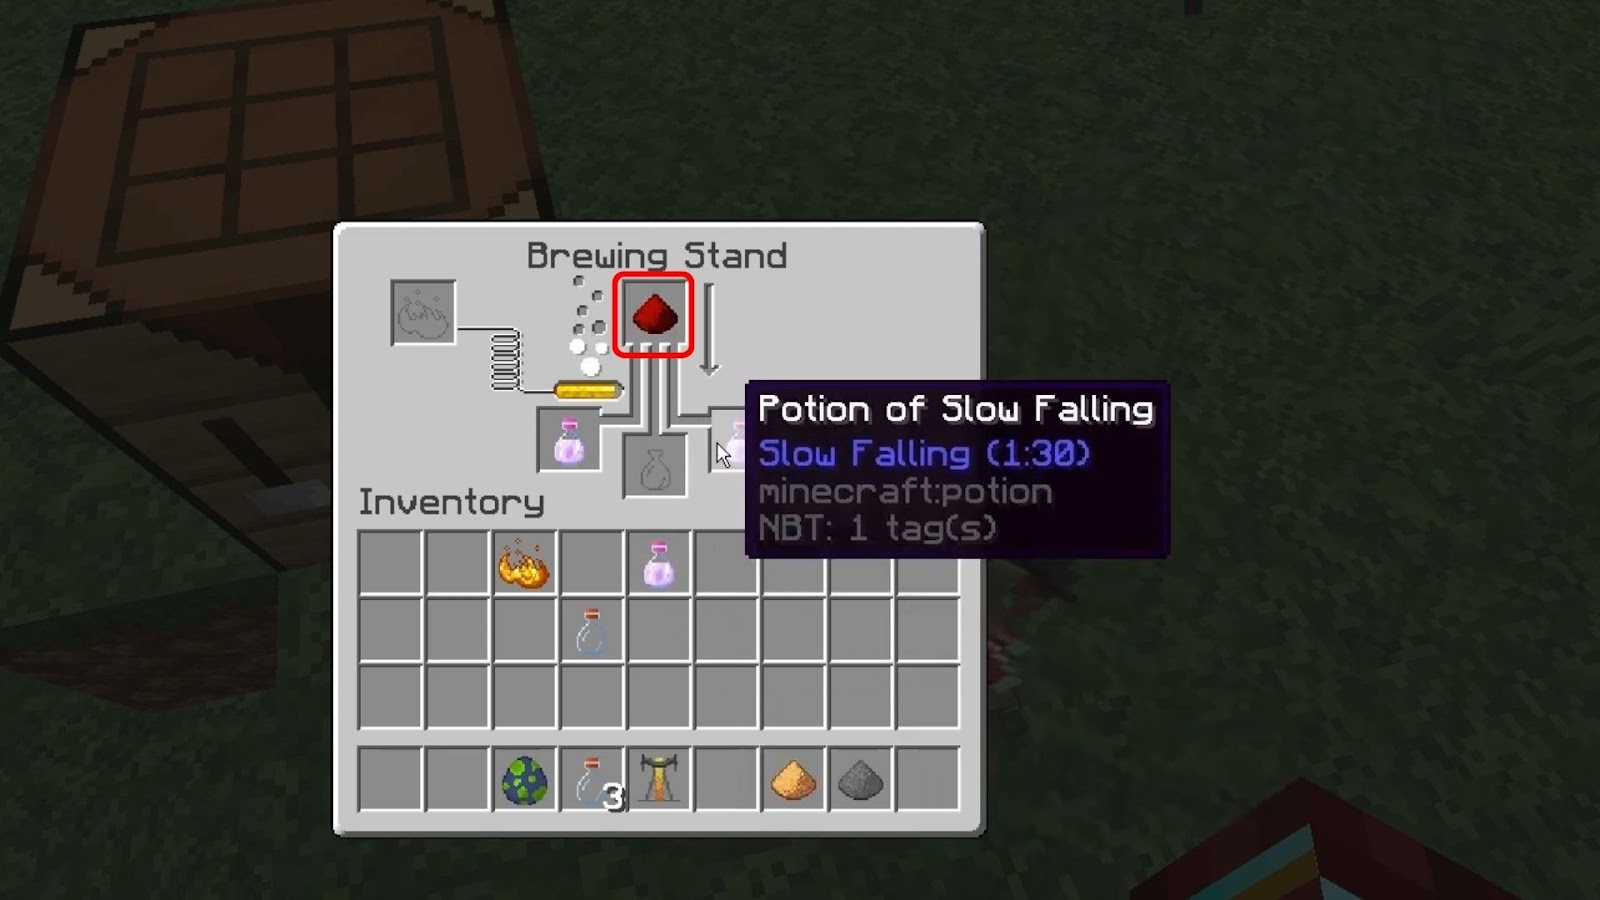 Slow Falling Potion Redstone in Brewing Stand